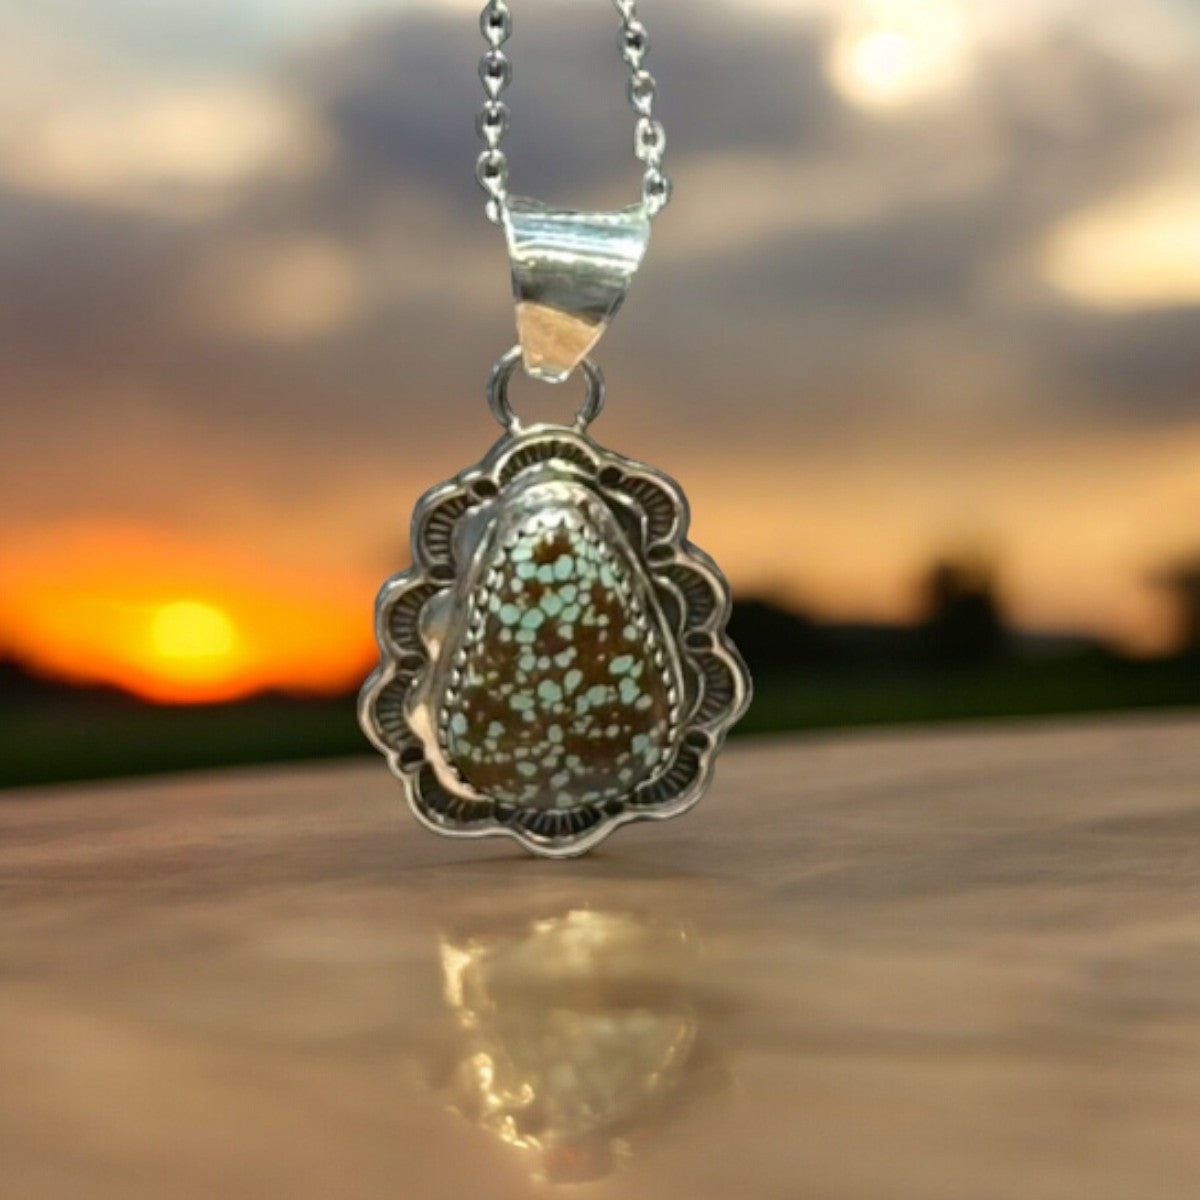 Thermopolis | Handmade Sterling Silver and Turquoise Pendant by Jarod Gordy